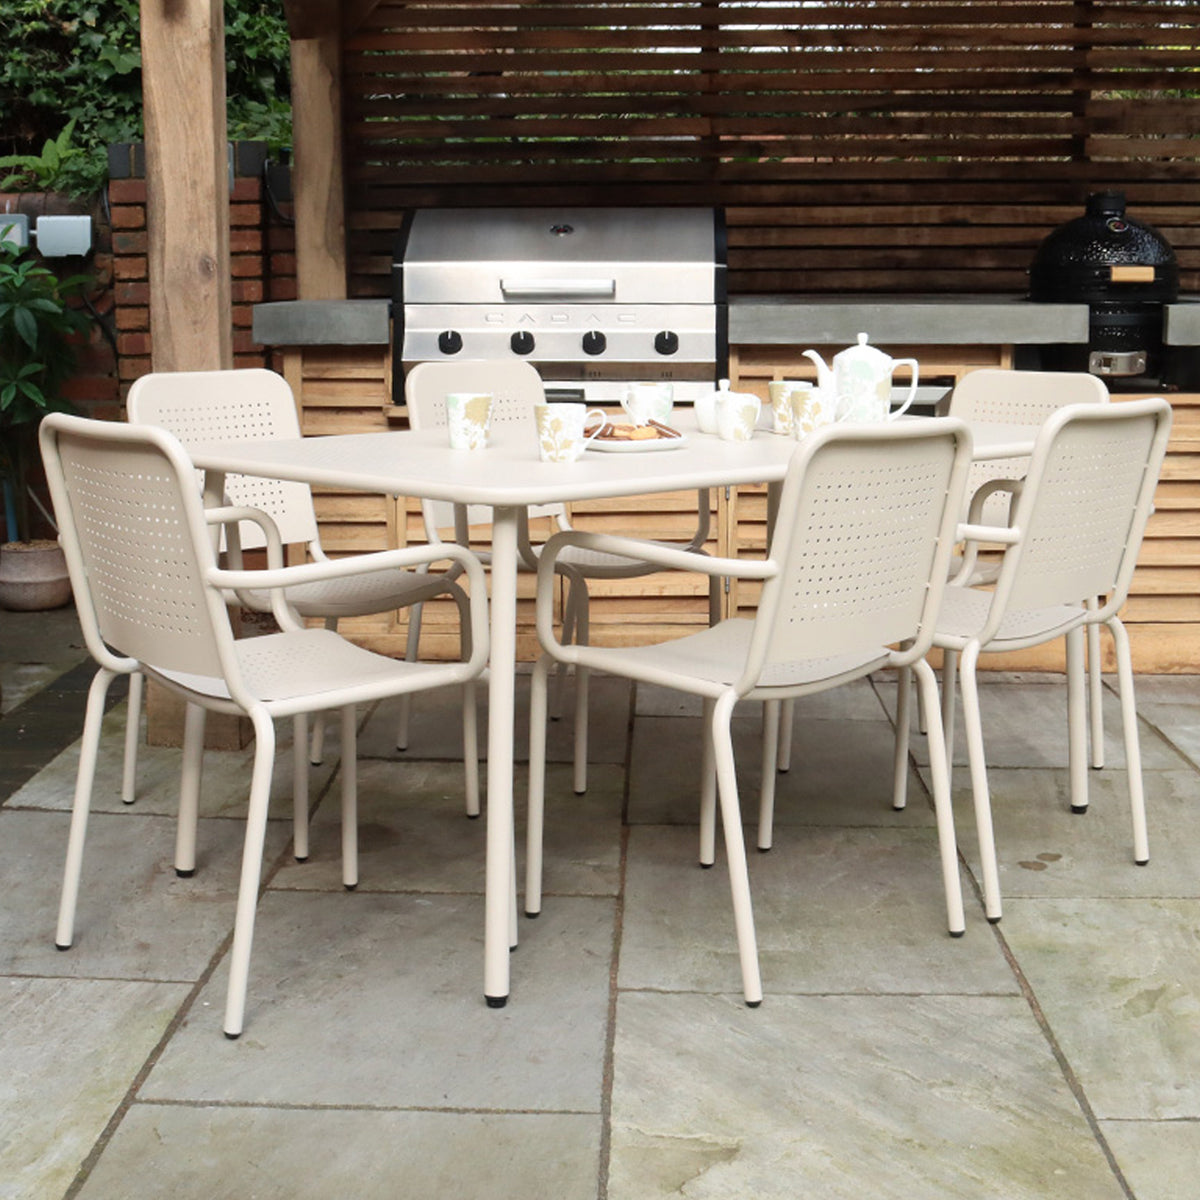 Porto Champagne 6 Seater Round Dining Set from Roseland Furniture